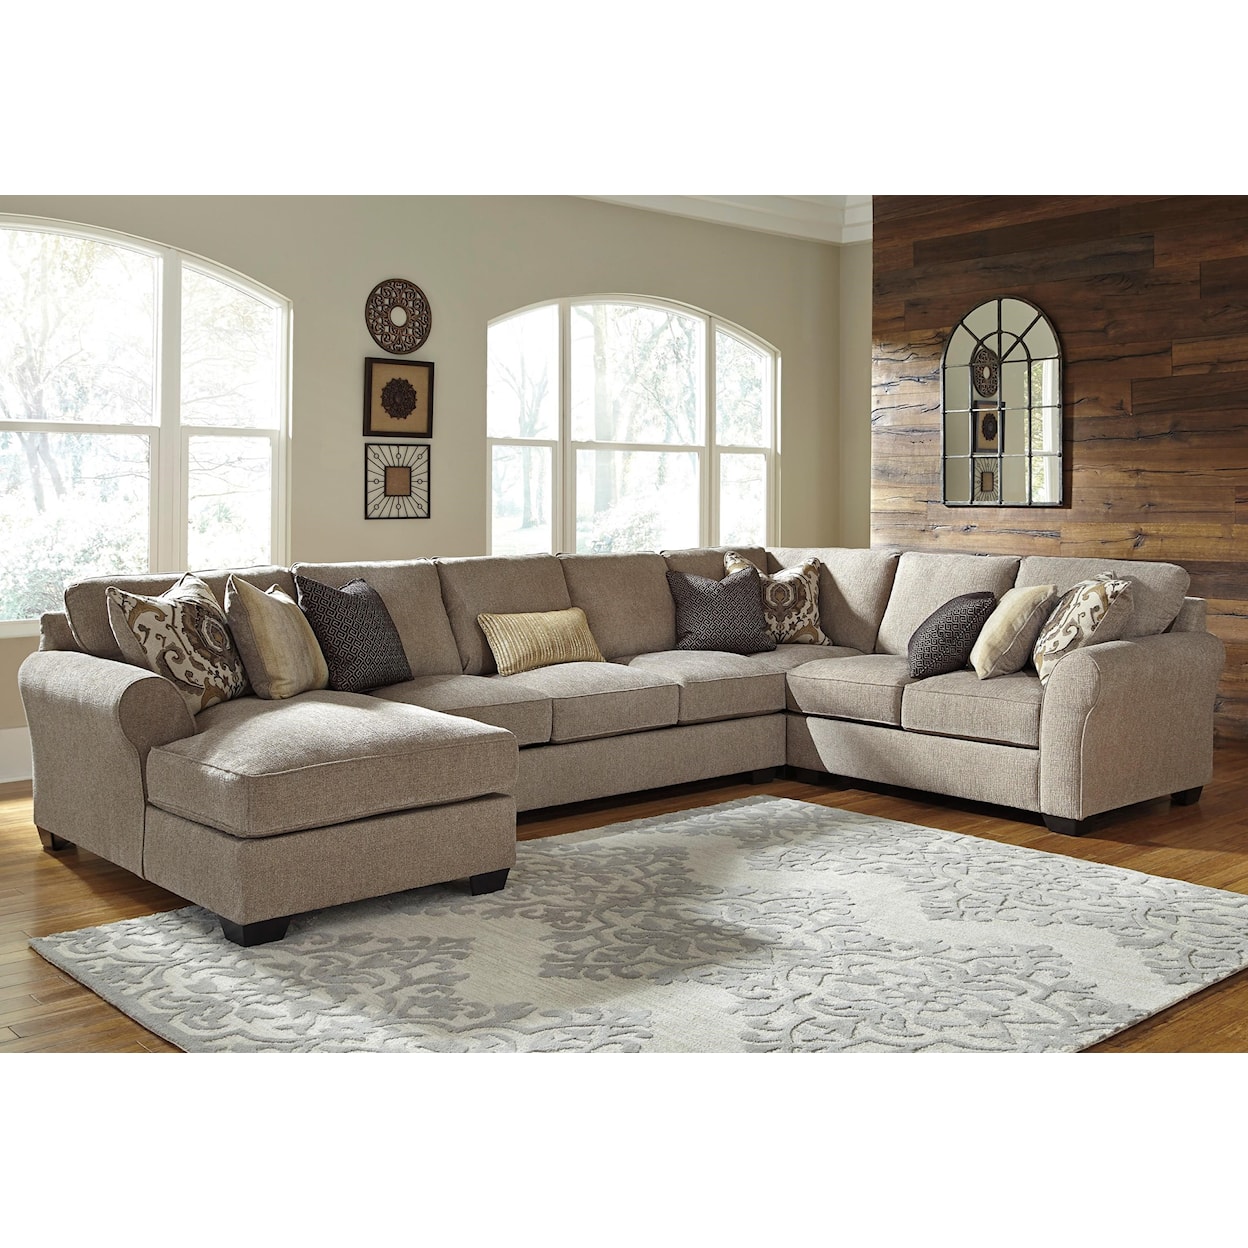 Benchcraft Pantomine 4-Piece Sectional with Chaise